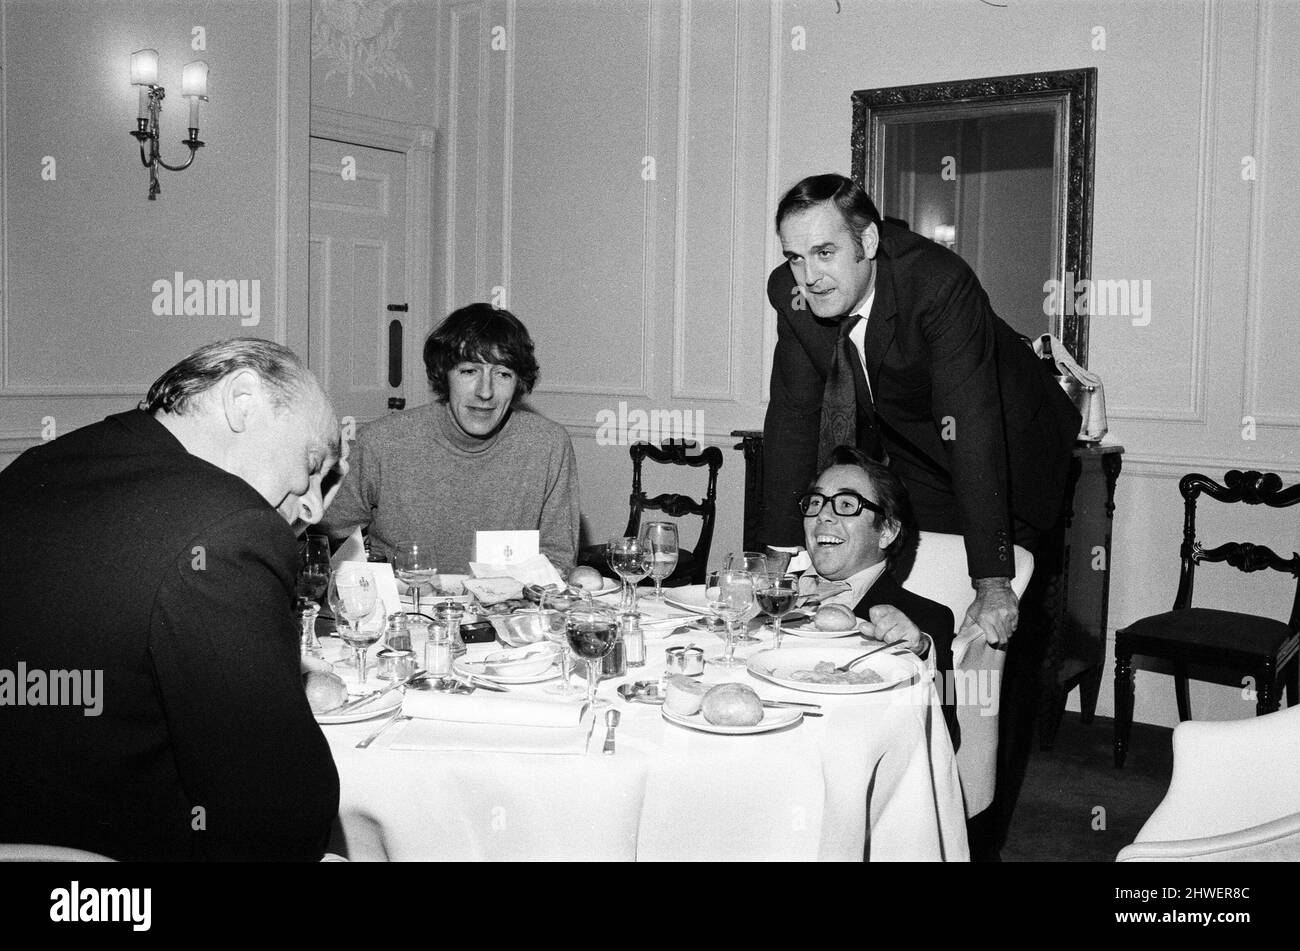 Donald Zec interviews Peter Cook, Ronnie Corbett and John Cleese at The Savoy Hotel, London. 19th November 1970. Stock Photo